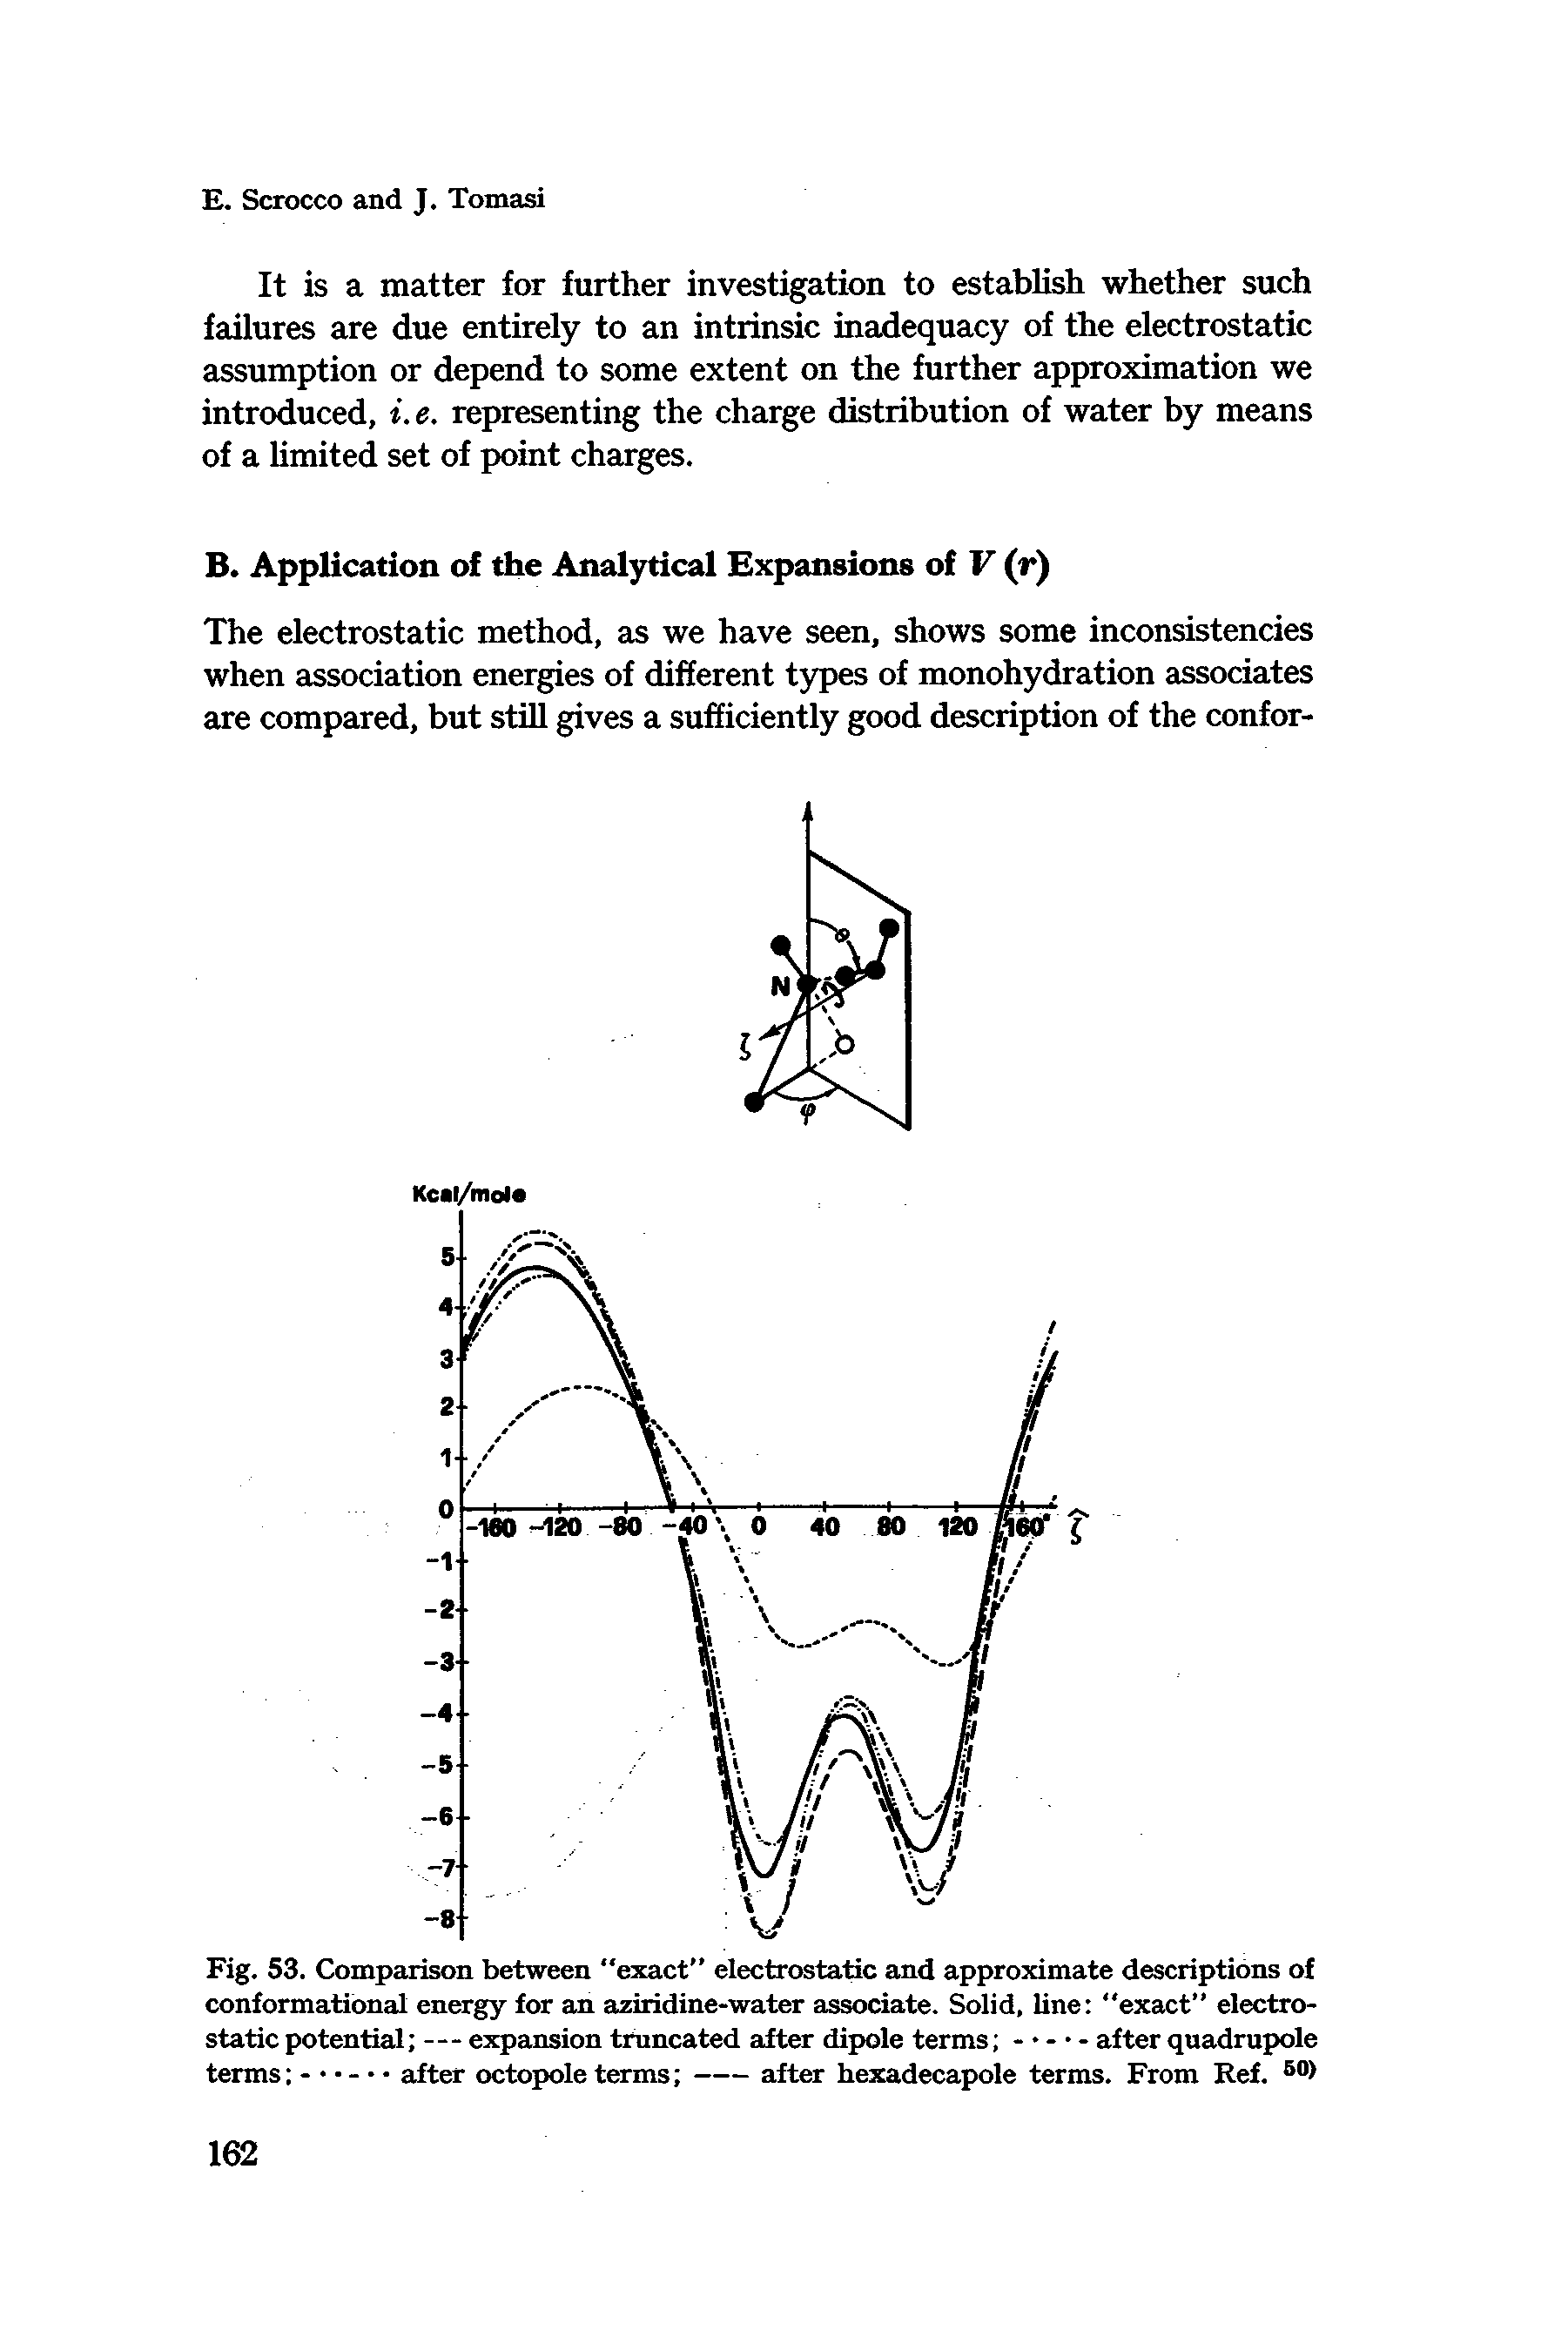 Fig. 53. Comparison between exact electrostatic and approximate descriptions of conformational energy for an aziridine-water associate. Solid, line "exact electrostatic potential — expansion truncated after dipole terms - — after quadrupole terms - -----after octopole terms ------after hexadecapole terms. From Ref. B0>...